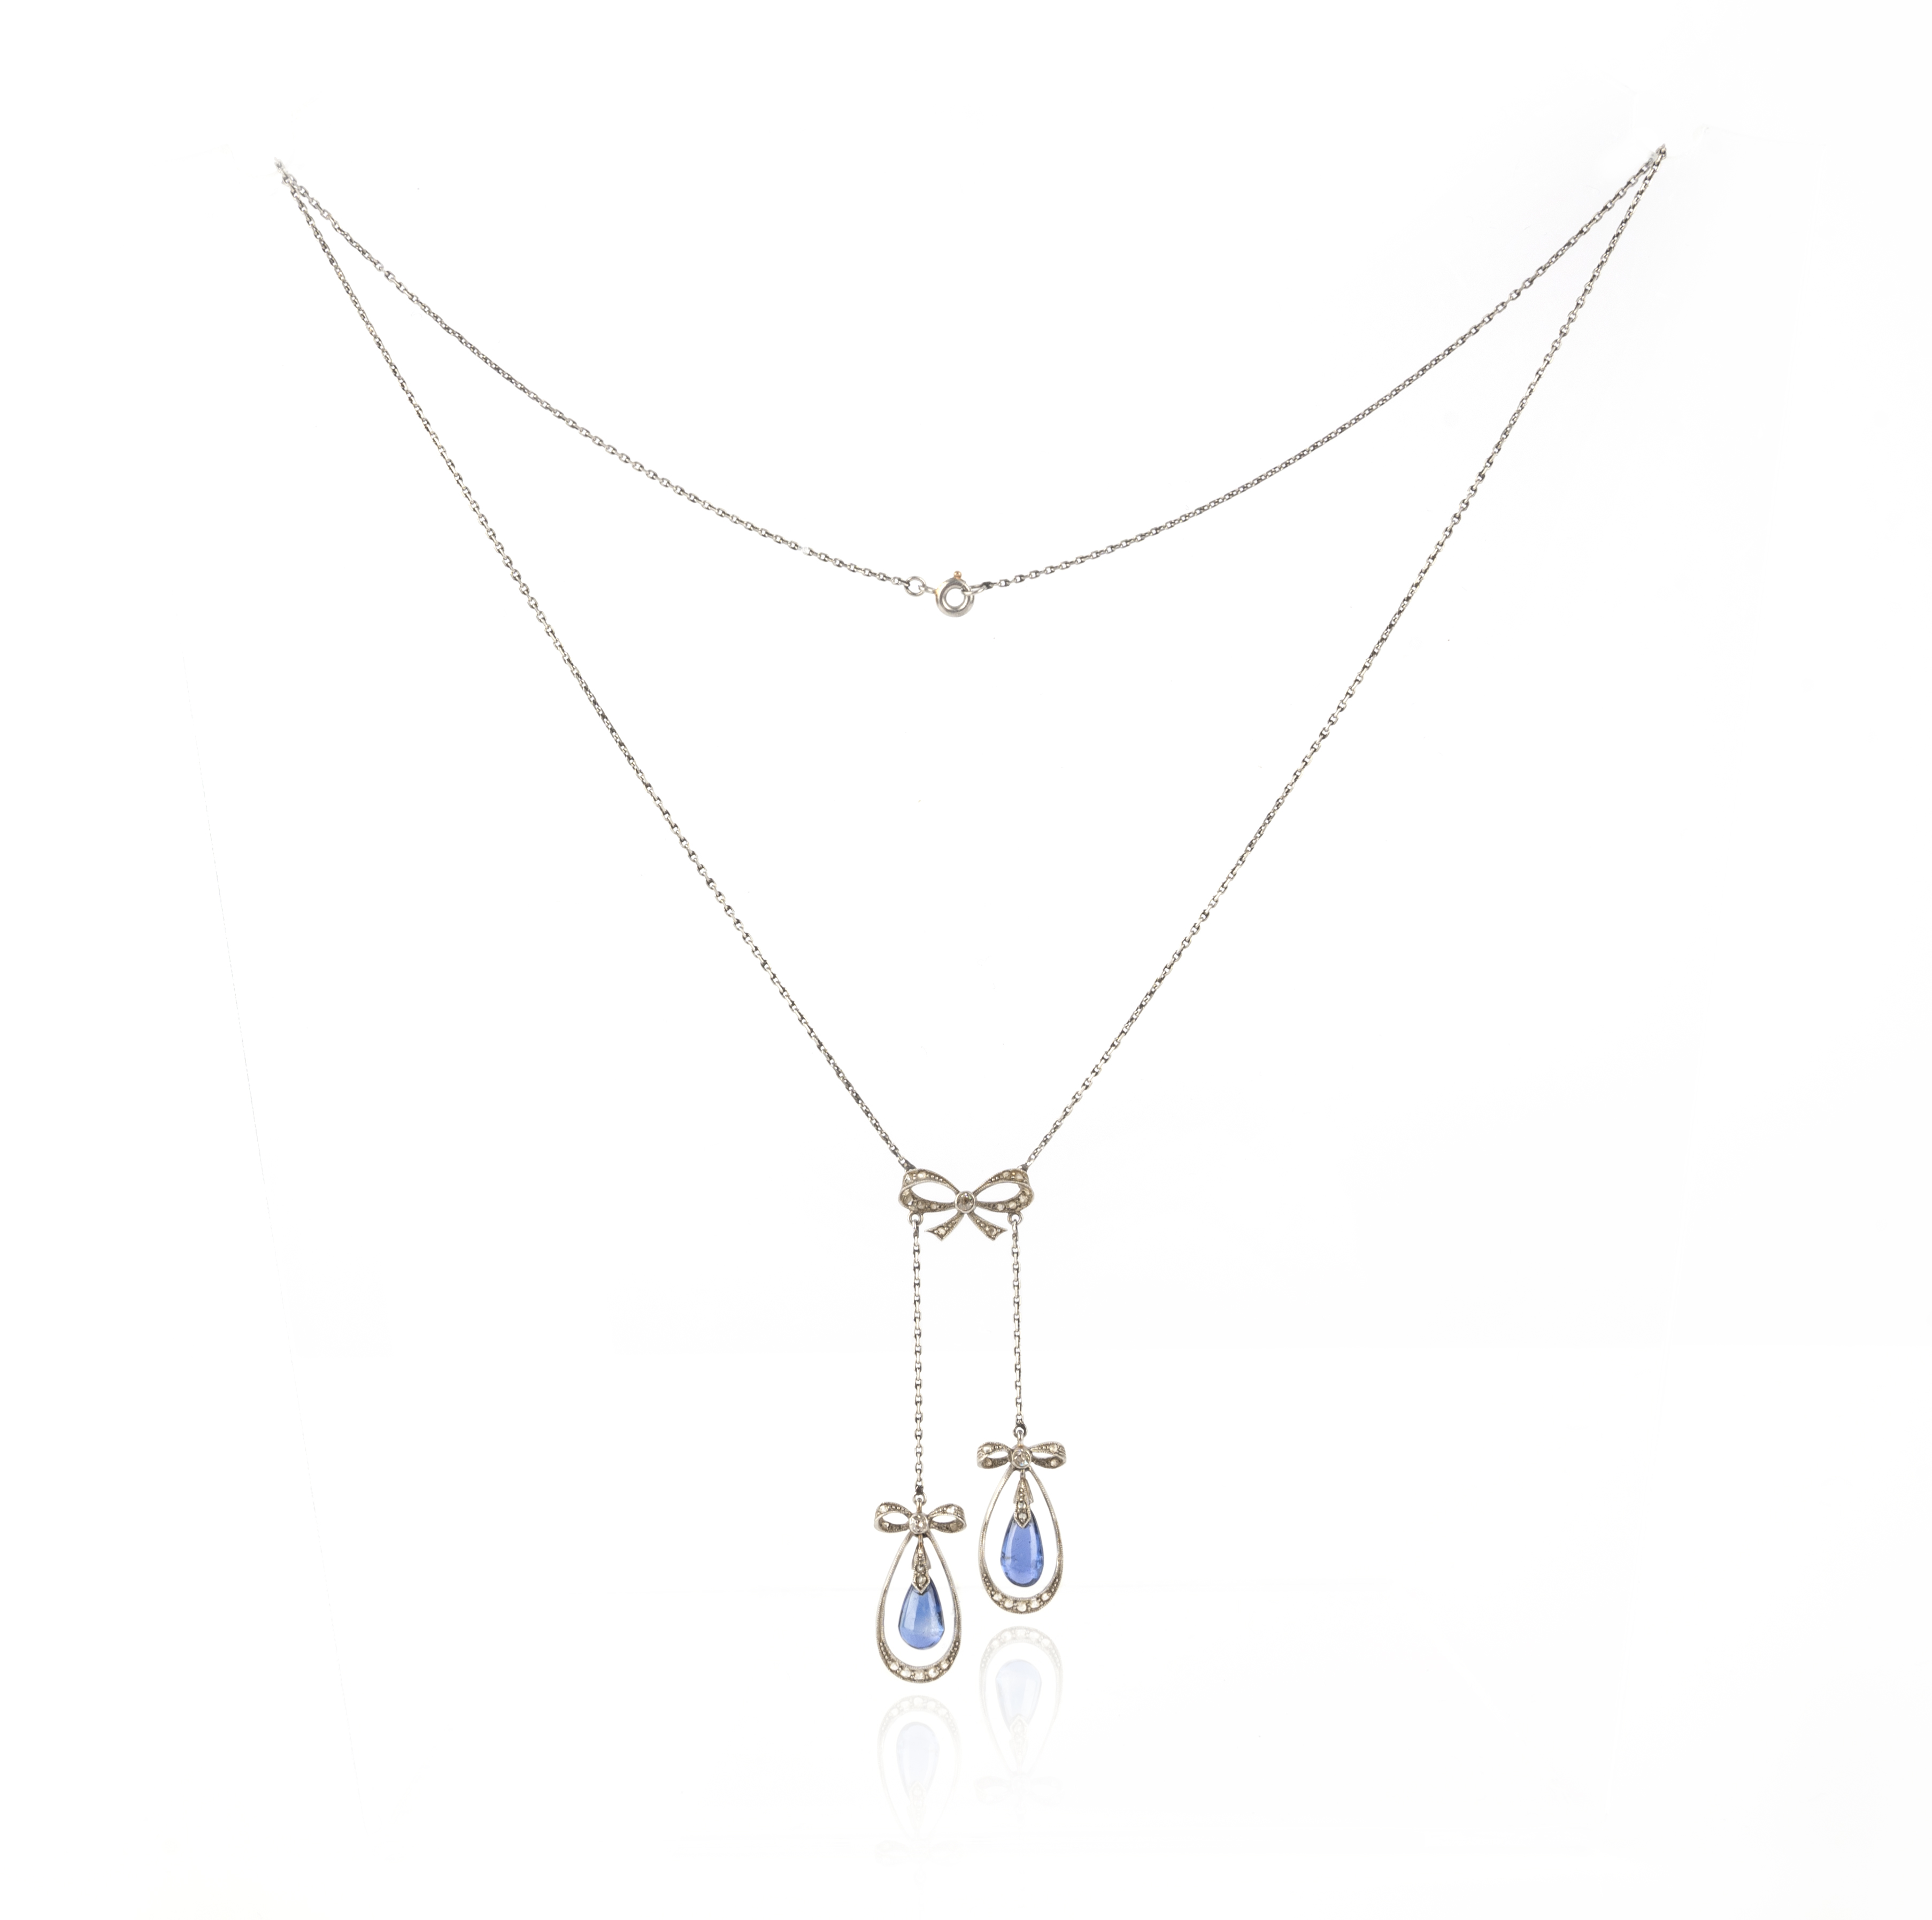 An Edwardian sapphire and diamond necklace, circa 1910, of negligée design, composed of a bow